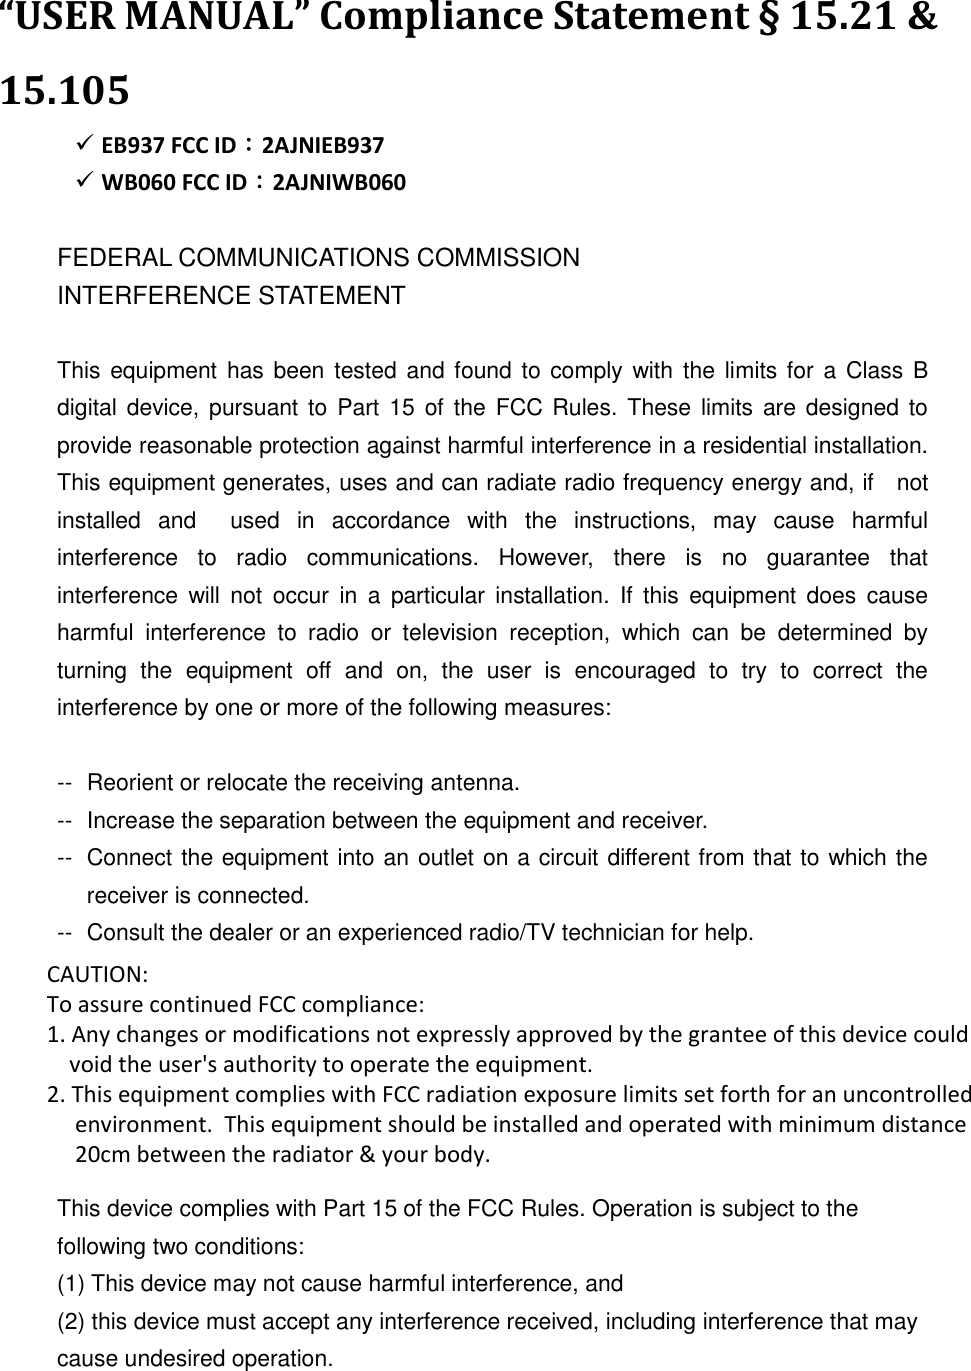  “USER MANUAL” Compliance Statement § 15.21 &amp; 15.105    EB937 FCC ID：2AJNIEB937  WB060 FCC ID：2AJNIWB060  FEDERAL COMMUNICATIONS COMMISSION INTERFERENCE STATEMENT  This equipment  has been tested  and found to comply with the limits for a  Class  B digital device,  pursuant to  Part  15  of  the FCC Rules. These limits  are designed to provide reasonable protection against harmful interference in a residential installation. This equipment generates, uses and can radiate radio frequency energy and, if    not installed  and    used  in  accordance  with  the  instructions,  may  cause  harmful interference  to  radio  communications.  However,  there  is  no  guarantee  that interference  will  not  occur  in  a  particular  installation.  If this  equipment  does  cause harmful  interference  to  radio  or  television  reception,  which  can  be  determined  by turning  the  equipment  off  and  on,  the  user  is  encouraged  to  try  to  correct  the interference by one or more of the following measures:  --  Reorient or relocate the receiving antenna. --  Increase the separation between the equipment and receiver. --  Connect the equipment into an outlet on a circuit different from that to which the receiver is connected. --  Consult the dealer or an experienced radio/TV technician for help.  CAUTION:   To assure continued FCC compliance:   Any changes or modifications not expressly approved by the grantee of this device could void the user&apos;s authority to operate the equipment.  This device complies with Part 15 of the FCC Rules. Operation is subject to the following two conditions: (1) This device may not cause harmful interference, and (2) this device must accept any interference received, including interference that may cause undesired operation.    CAUTION:  To assure continued FCC compliance:  1. Any changes or modifications not expressly approved by the grantee of this device could      void the user&apos;s authority to operate the equipment. 2. This equipment complies with FCC radiation exposure limits set forth for an uncontrolled      environment.  This equipment should be installed and operated with minimum distance       20cm between the radiator &amp; your body. 